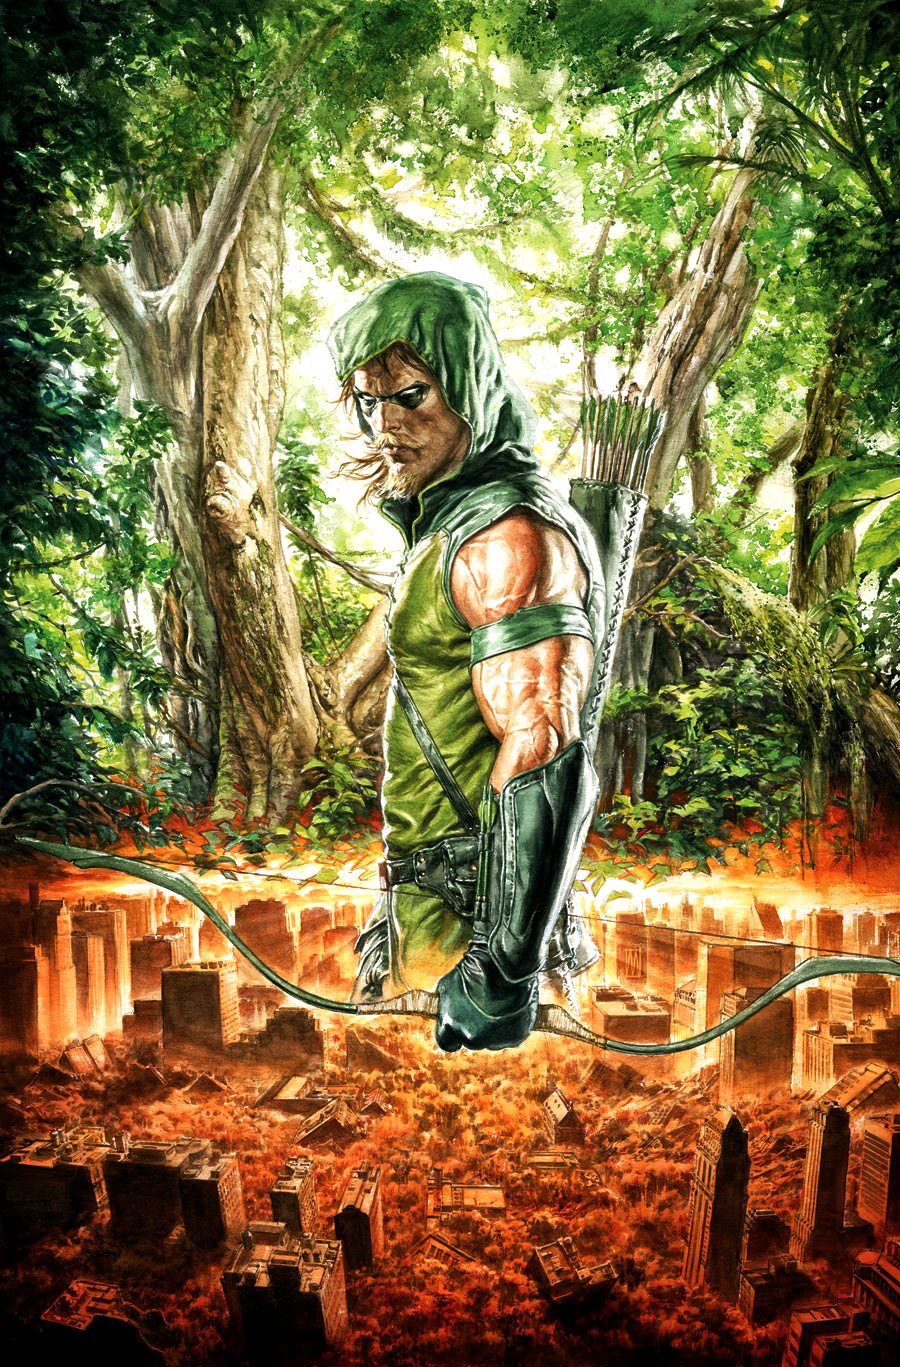 Oliver Queen AKA Green Arrow received his wealth from inheritance. Different scenarios and over his storyline he's lost his company and wasted his money. He's not at Iron-Man level of scientific knowledge or has Bruce Waynes business savy, but that don't mean he is poor.